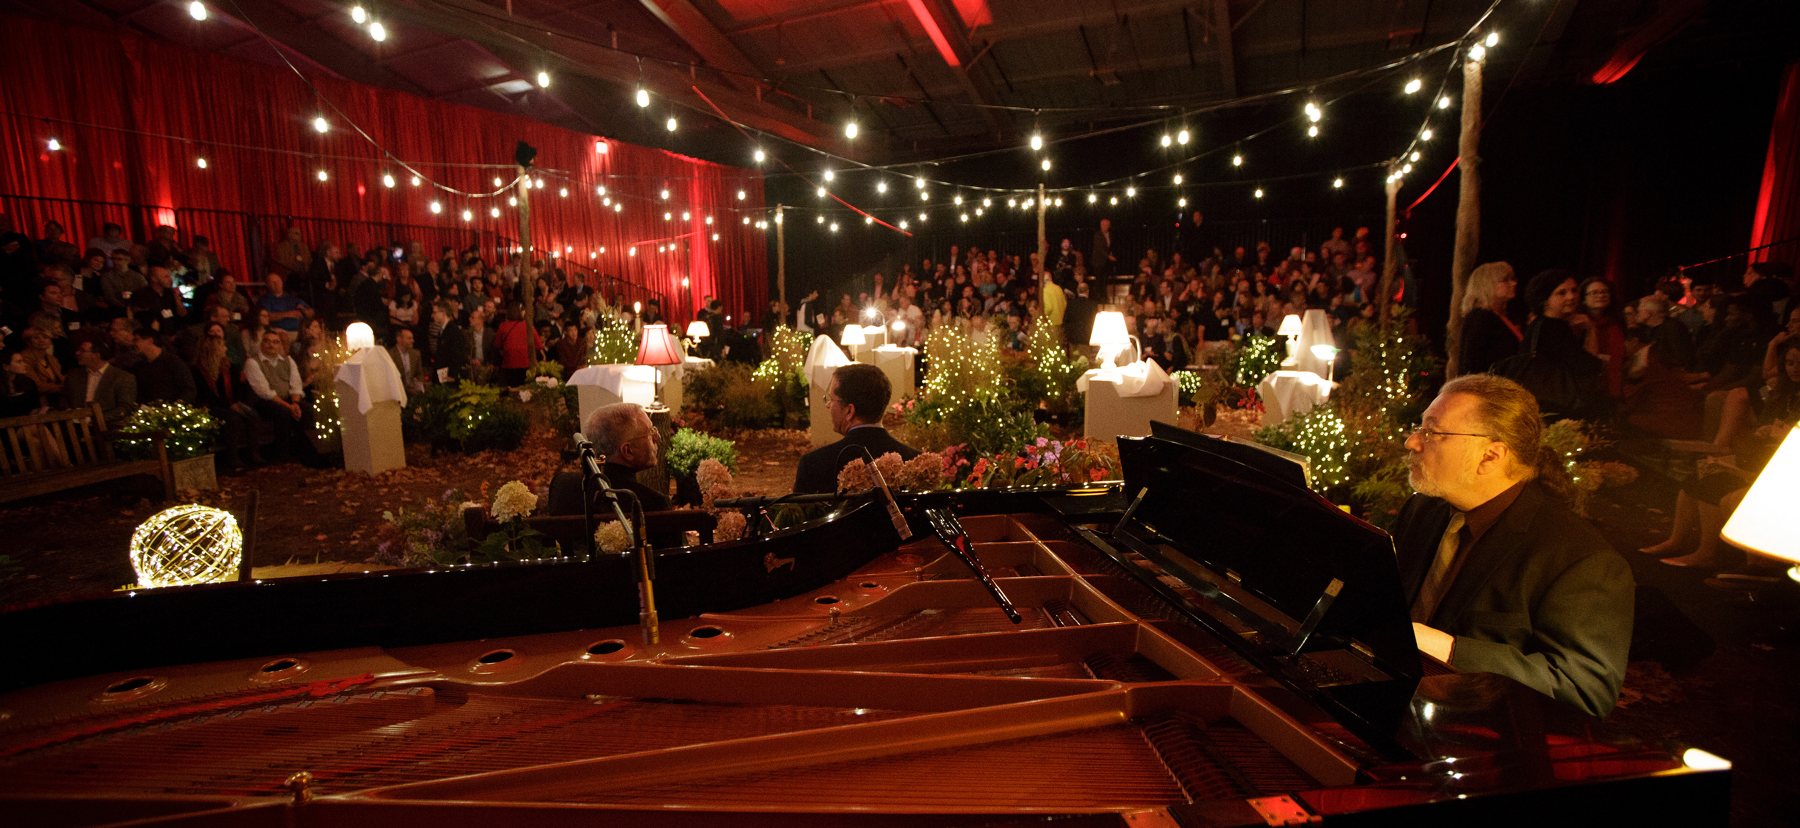 A man in the foreground plays piano in front of a celebration gala